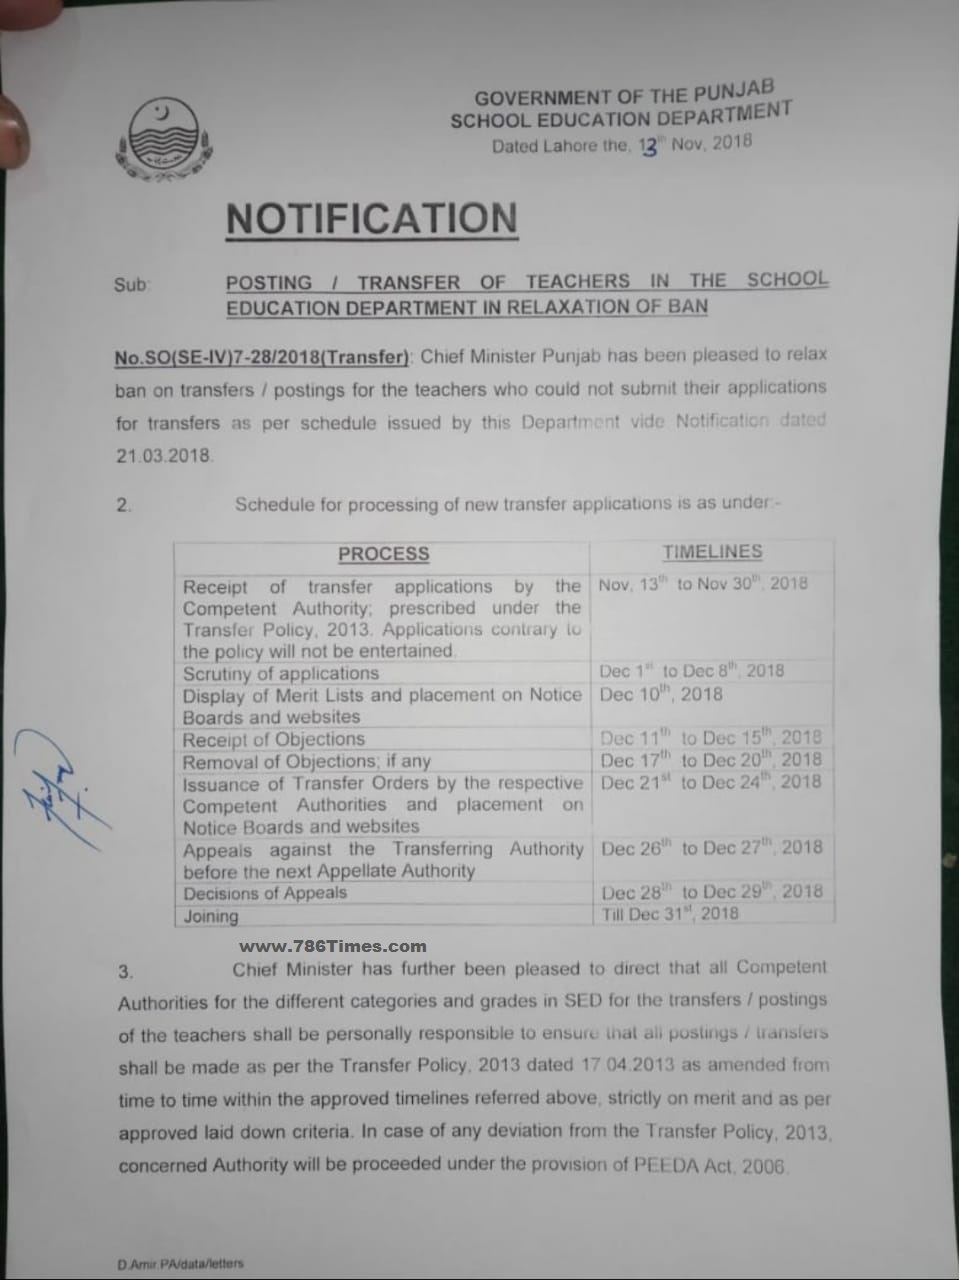 POSTING TRANSFER OF TEACHERS IN THE SCHOOL EDUCATION DEPARTMENT IN RELAXATION OF BAN